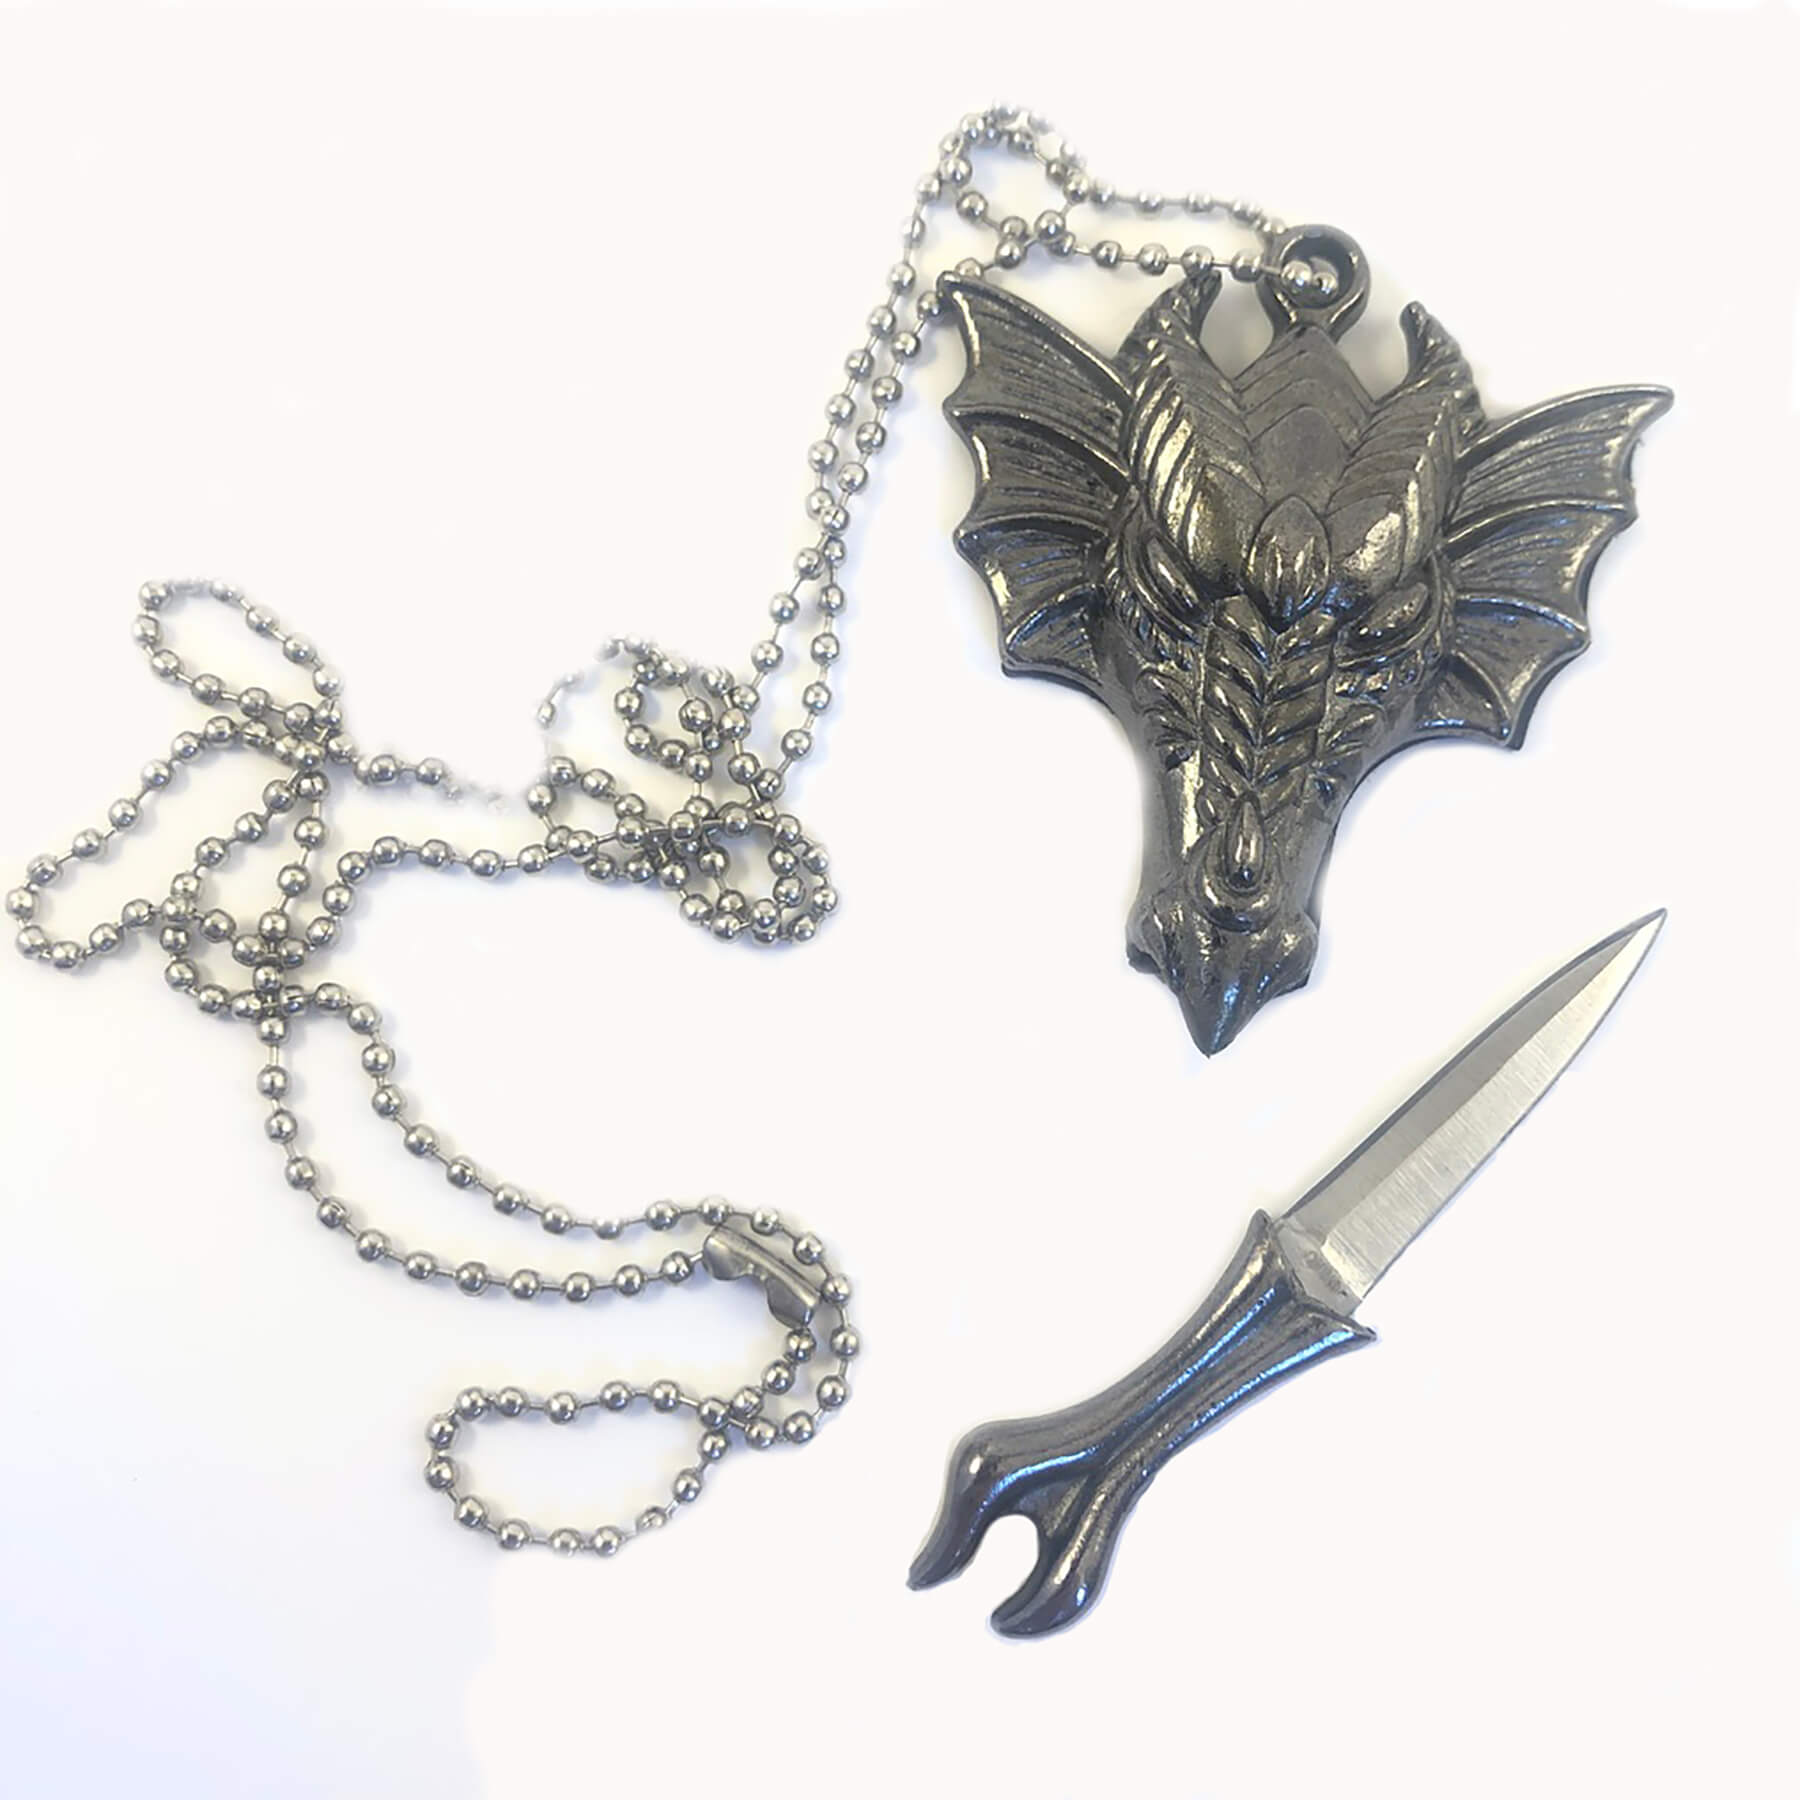 Middle Finger Necklace With Hidden Neck Knife – Extremely-Sharp.com